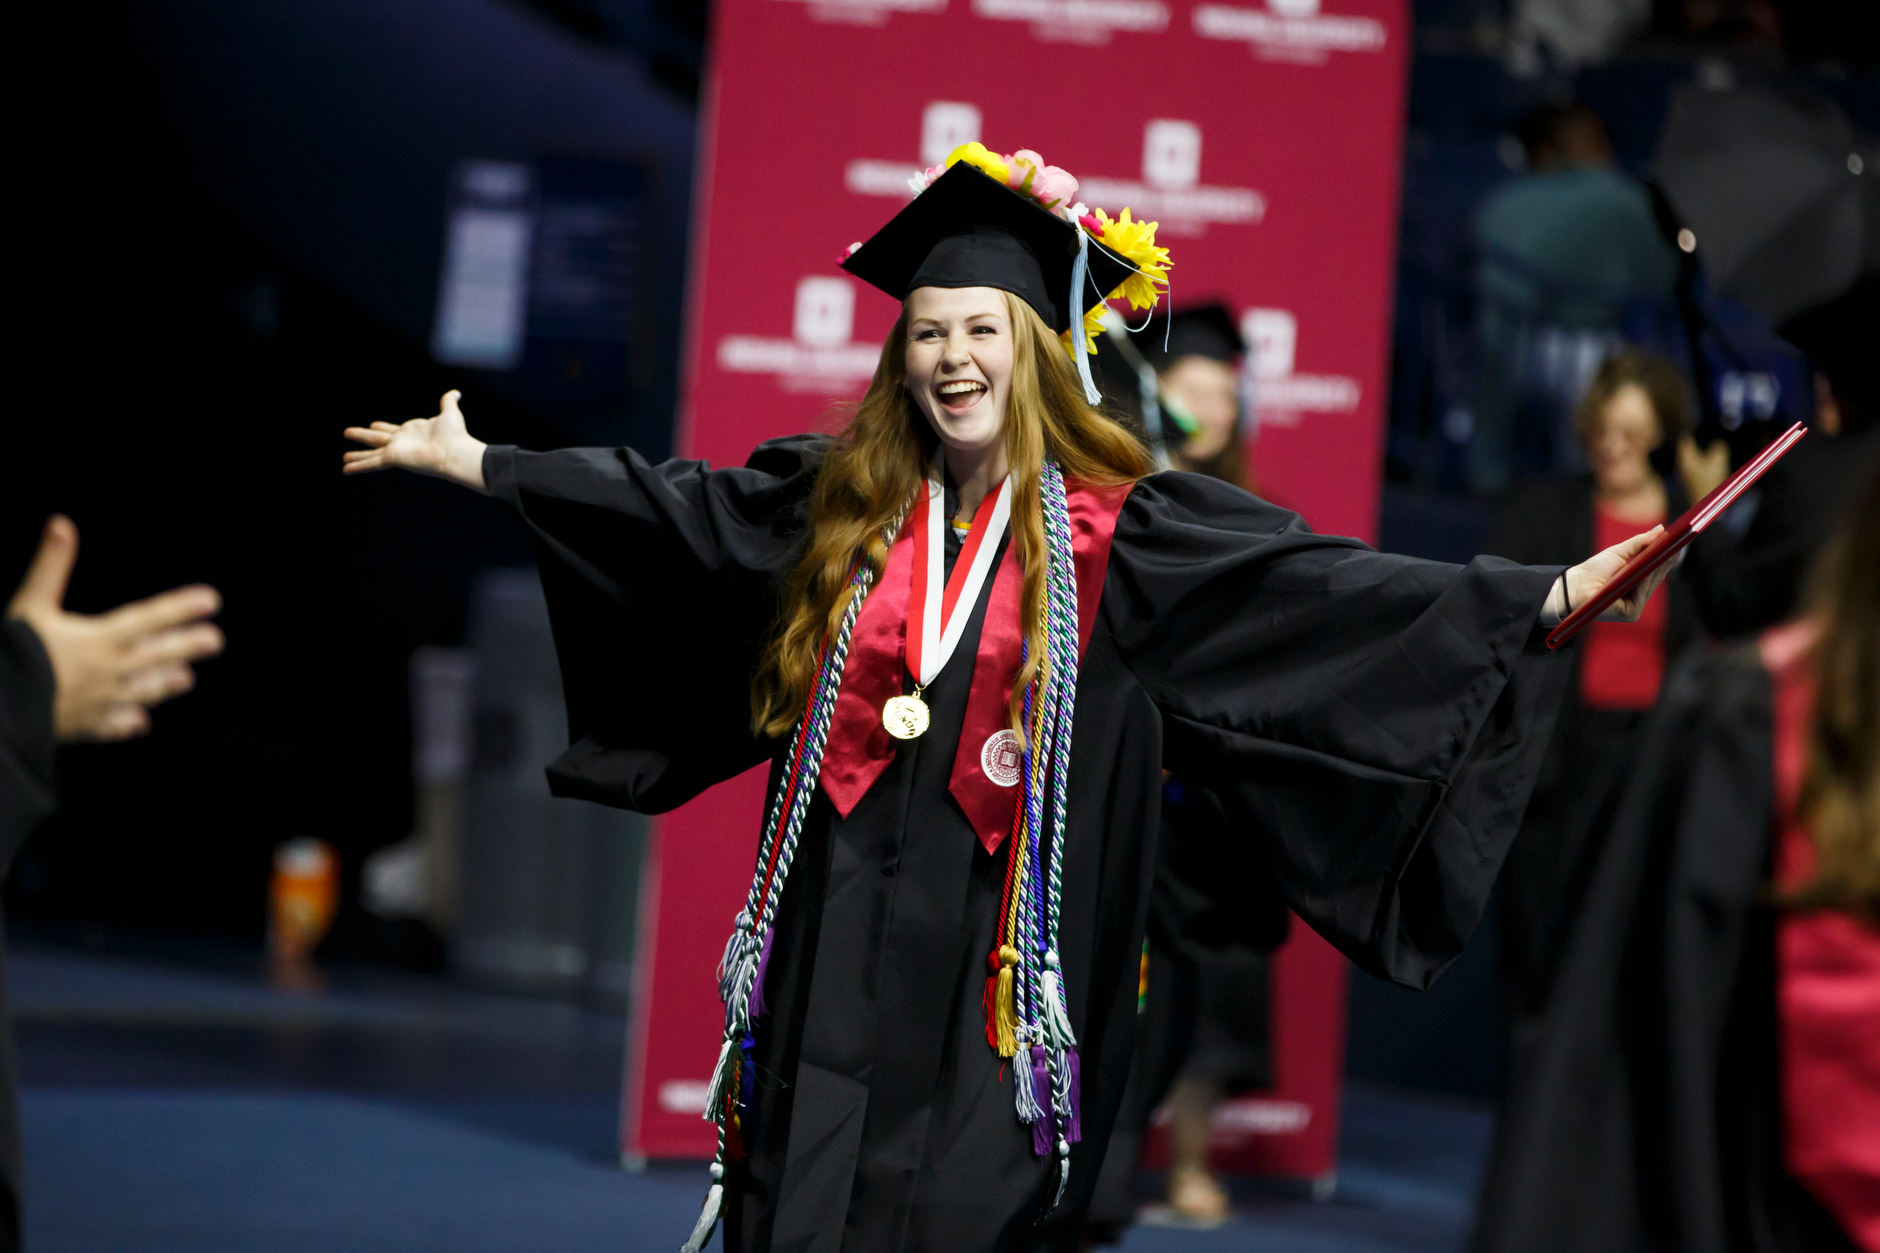 A graduate celebrates after receiving her diploma during the IU South Bend Commencement at the University of Notre Dame on Tuesday, May 7, 2019. (James Brosher/Indiana University)